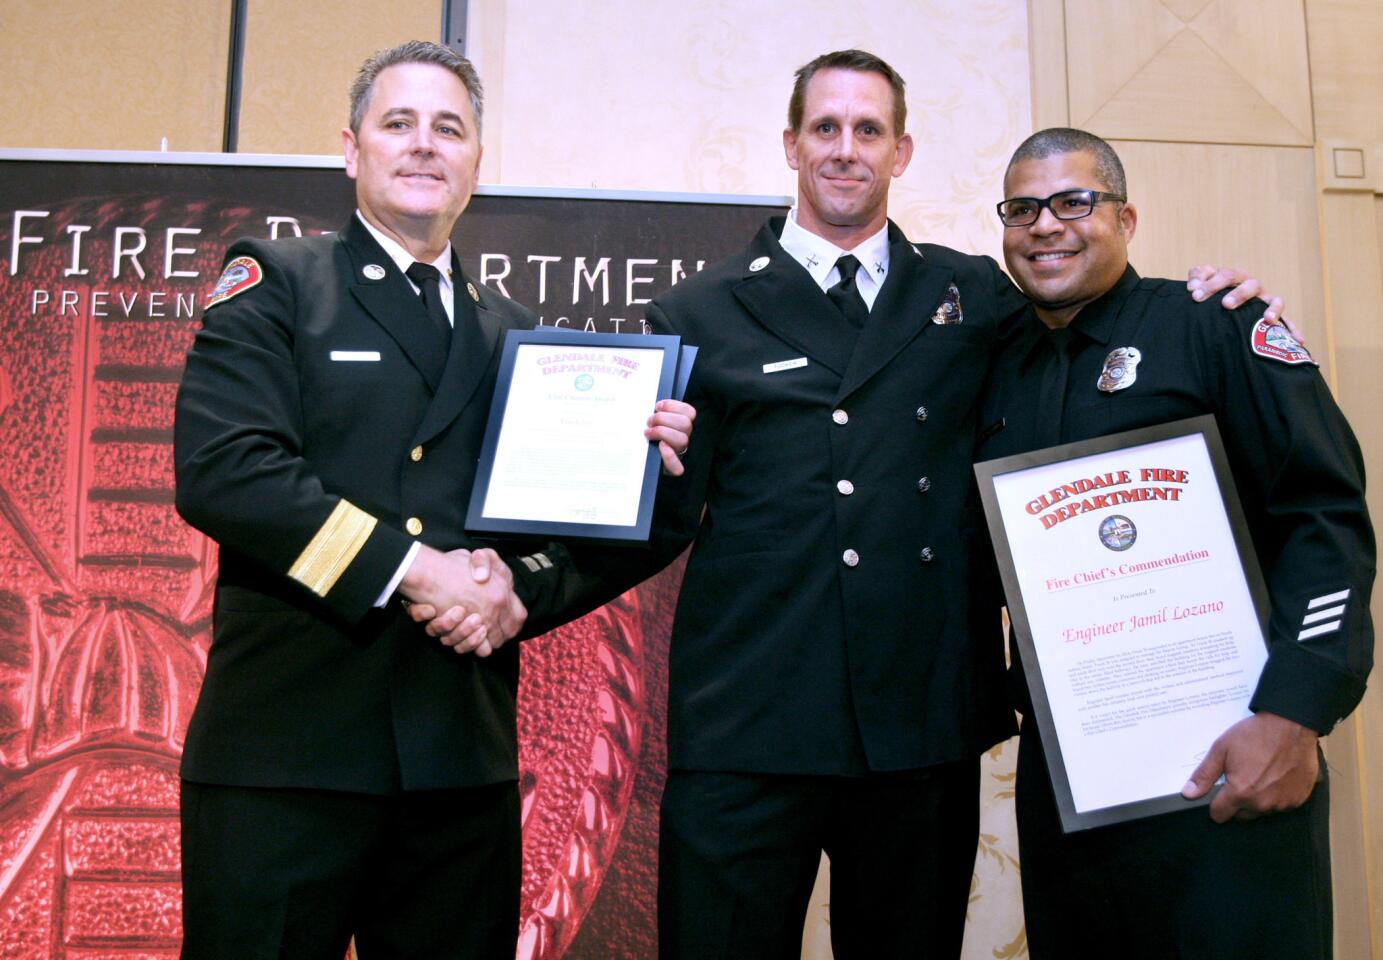 Glendale Fired Dept. chief Greg Fish, left, with Unit Citations winners T26/C Captain Todd Tucker, center, and engineer Jamil Lozano, right, at the annual City of Glendale Fire Department Awards Luncheon at the Hilton in Glendale on Wednesday, October 7, 2015. Lozano also got the Fire Chief's Commendation.